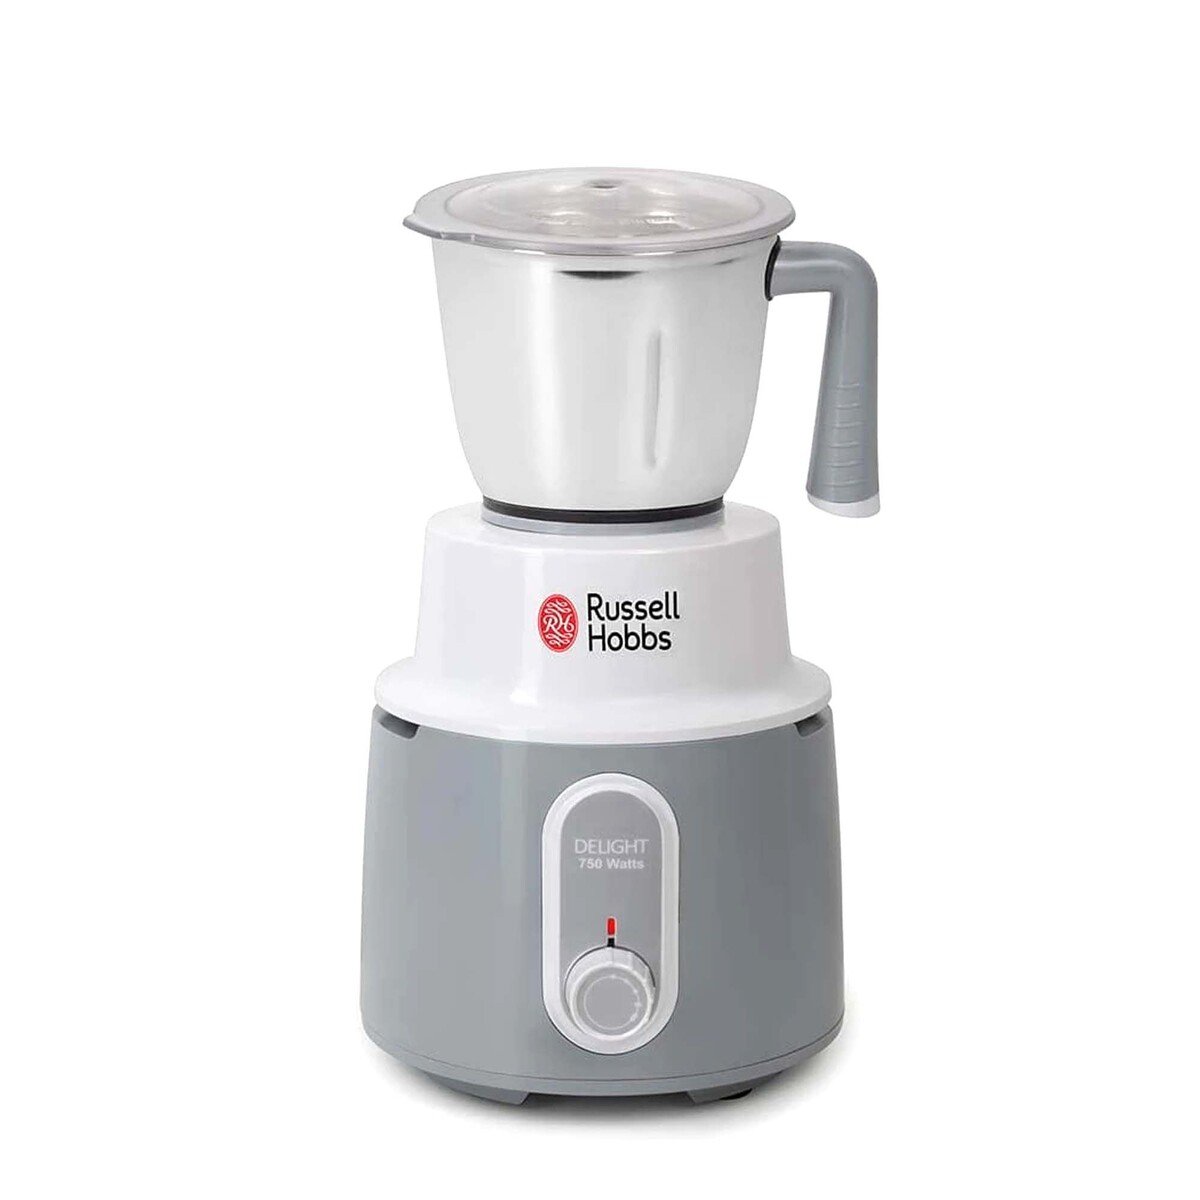 range lose Collision course Russell Hobbs Mixer Grinder Delight MG42506 750W Online at Best Price |  Indian Mixers | Lulu UAE